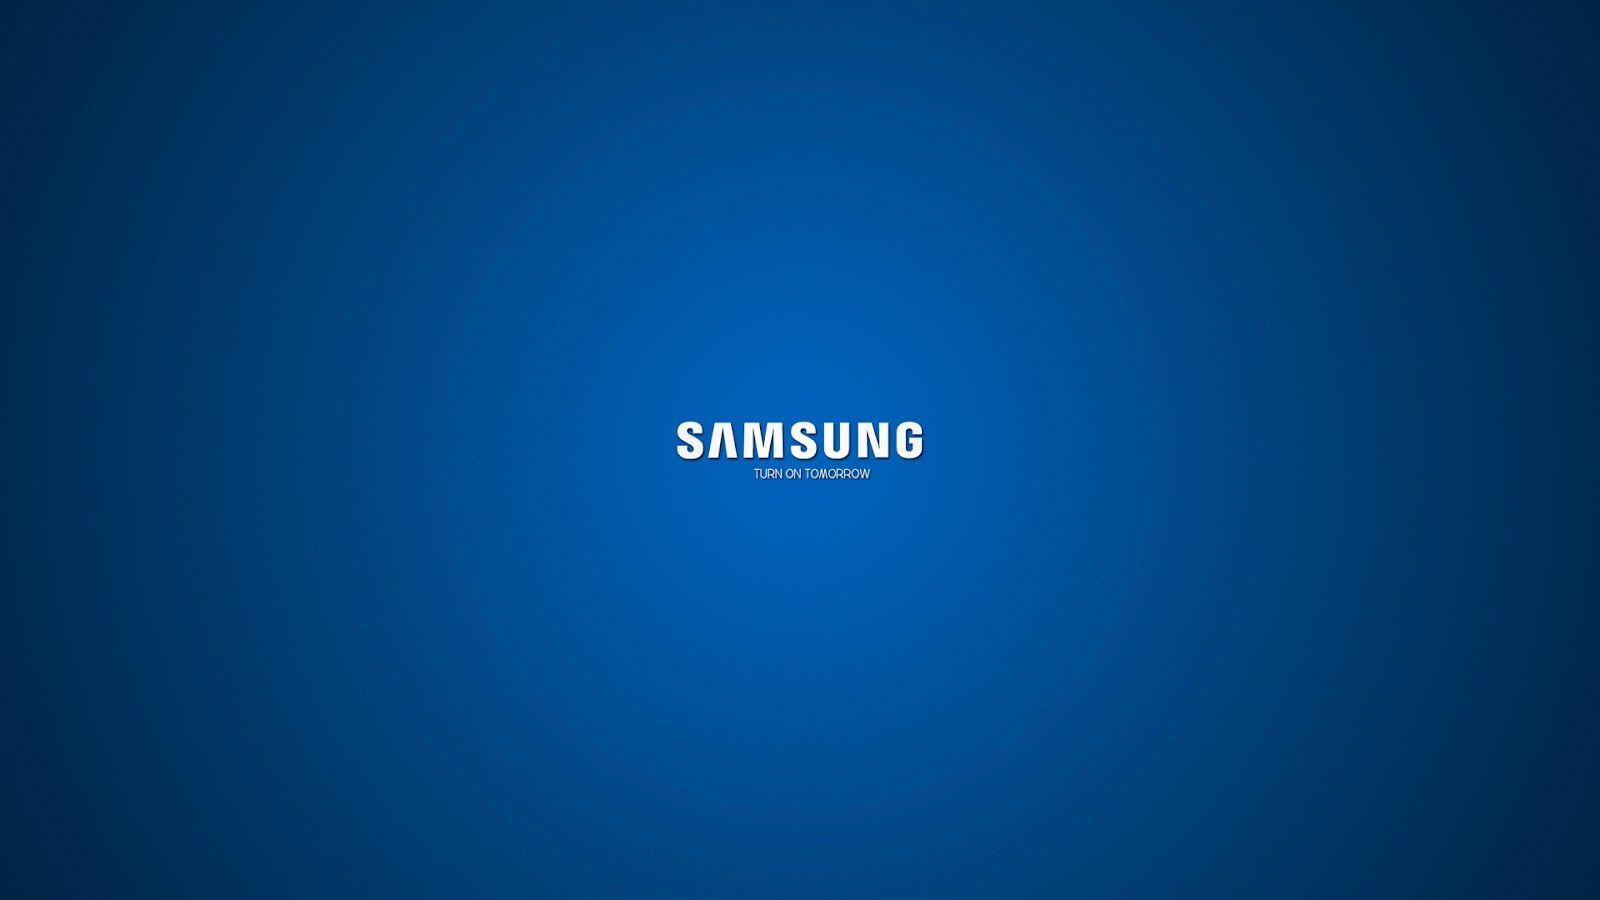 Samsung Logo. Technology Trend Topic Collection